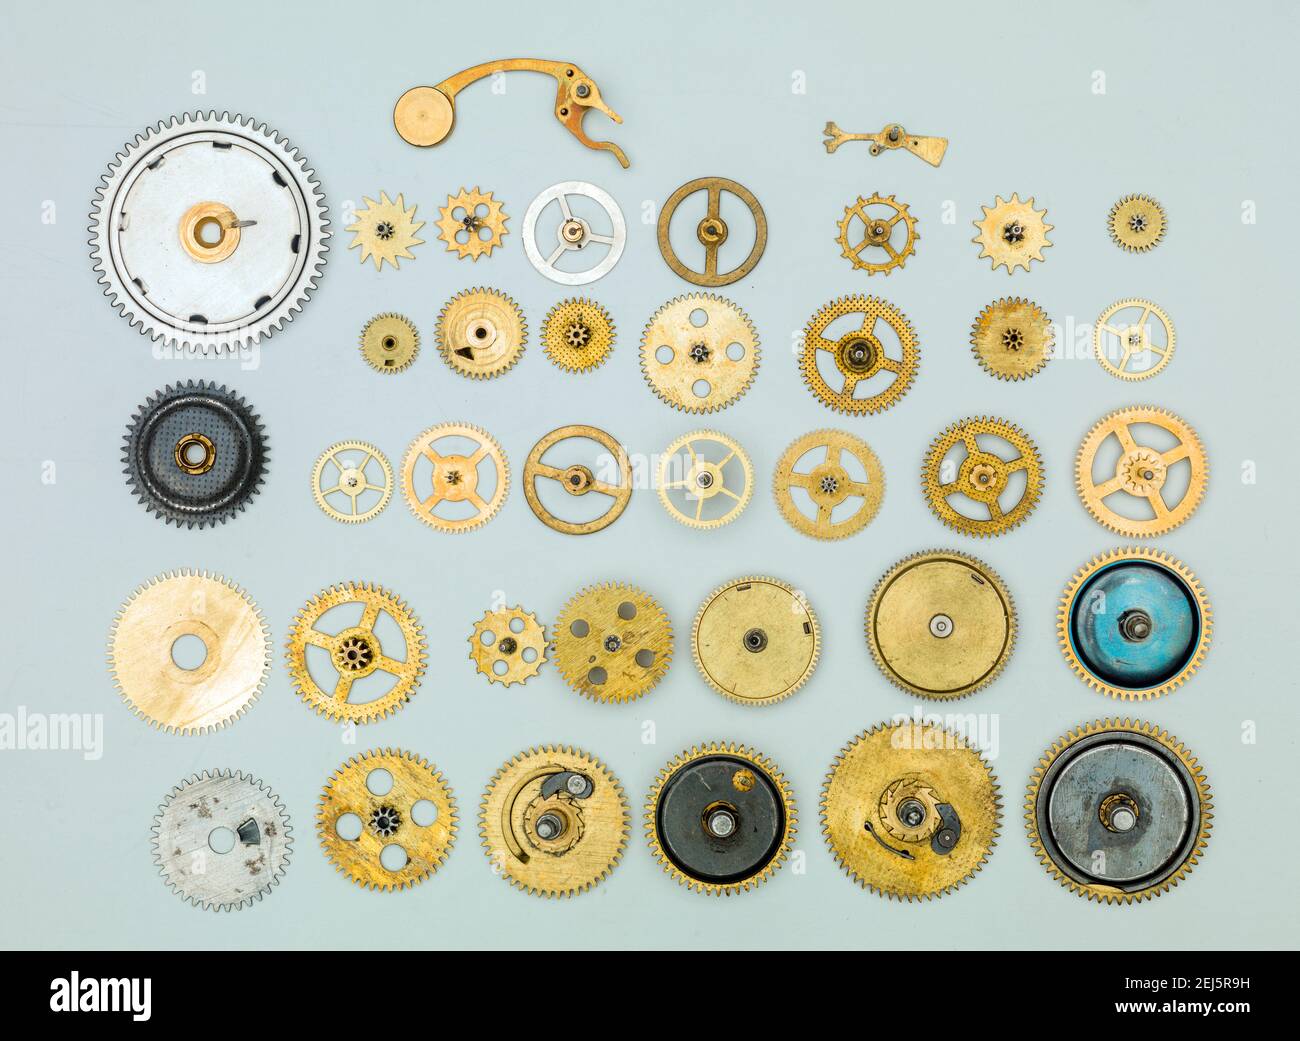 Vintage gears and cogs on light blue background. Stock Photo